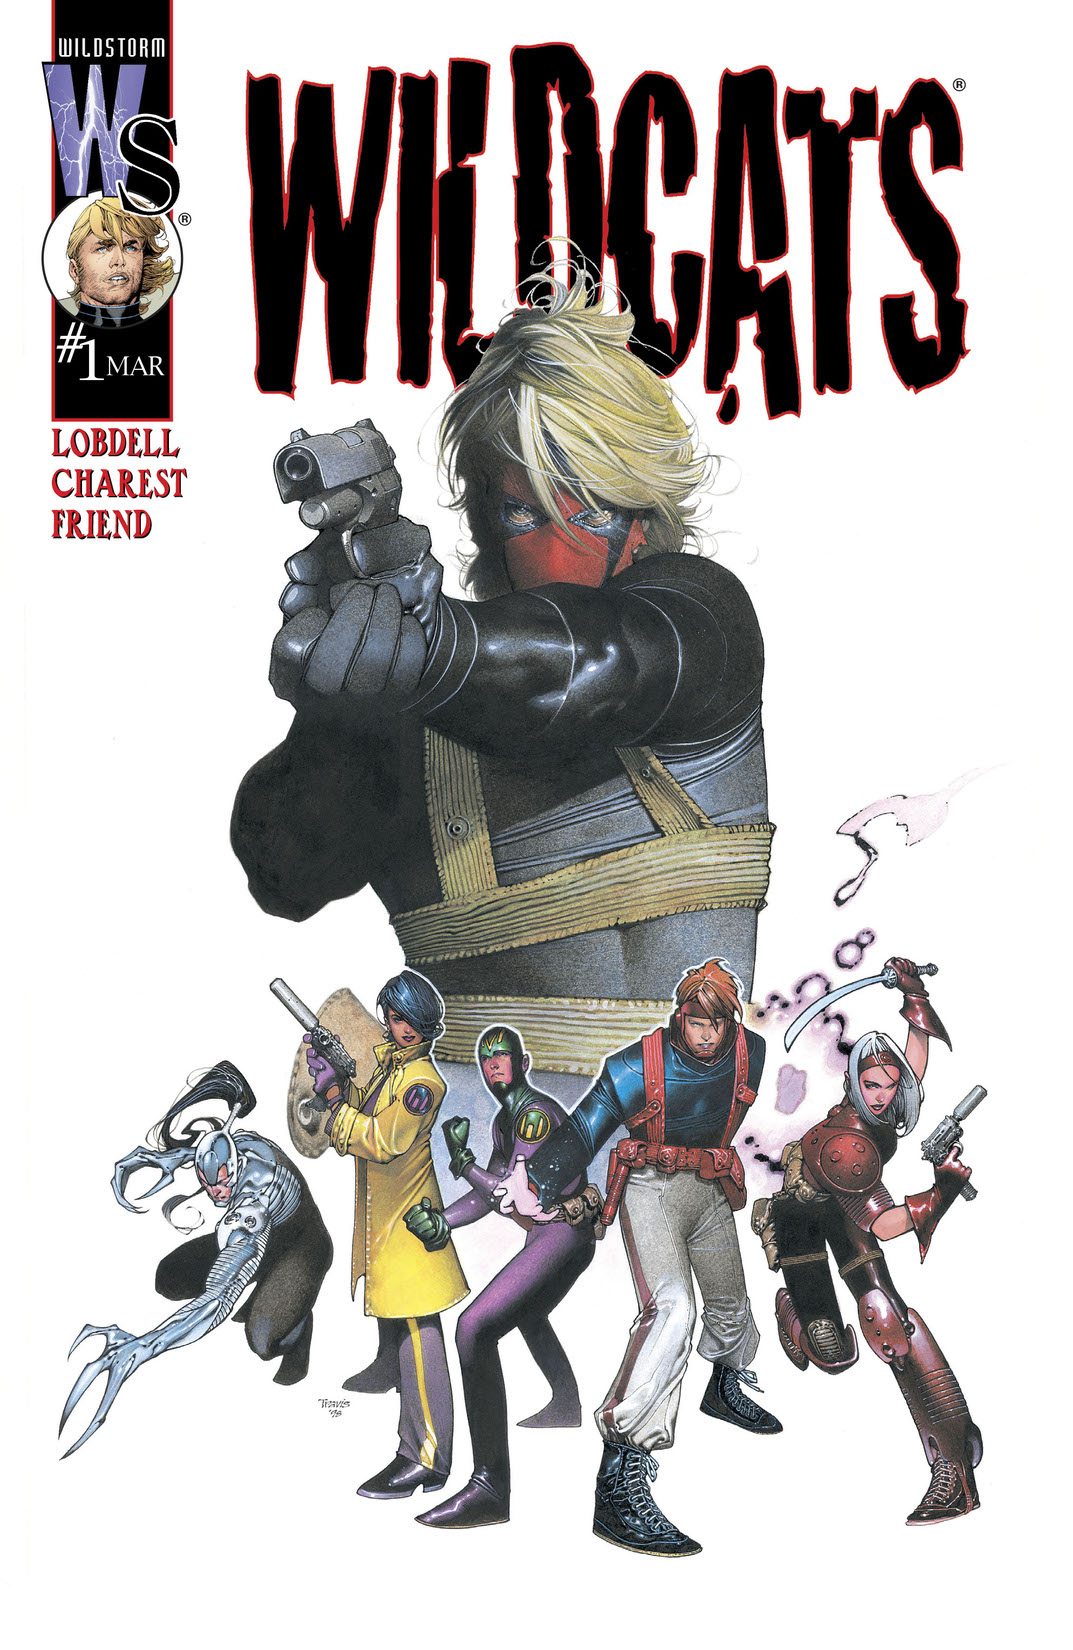 Wildcats Volume 2 (1999-) #1 preview images